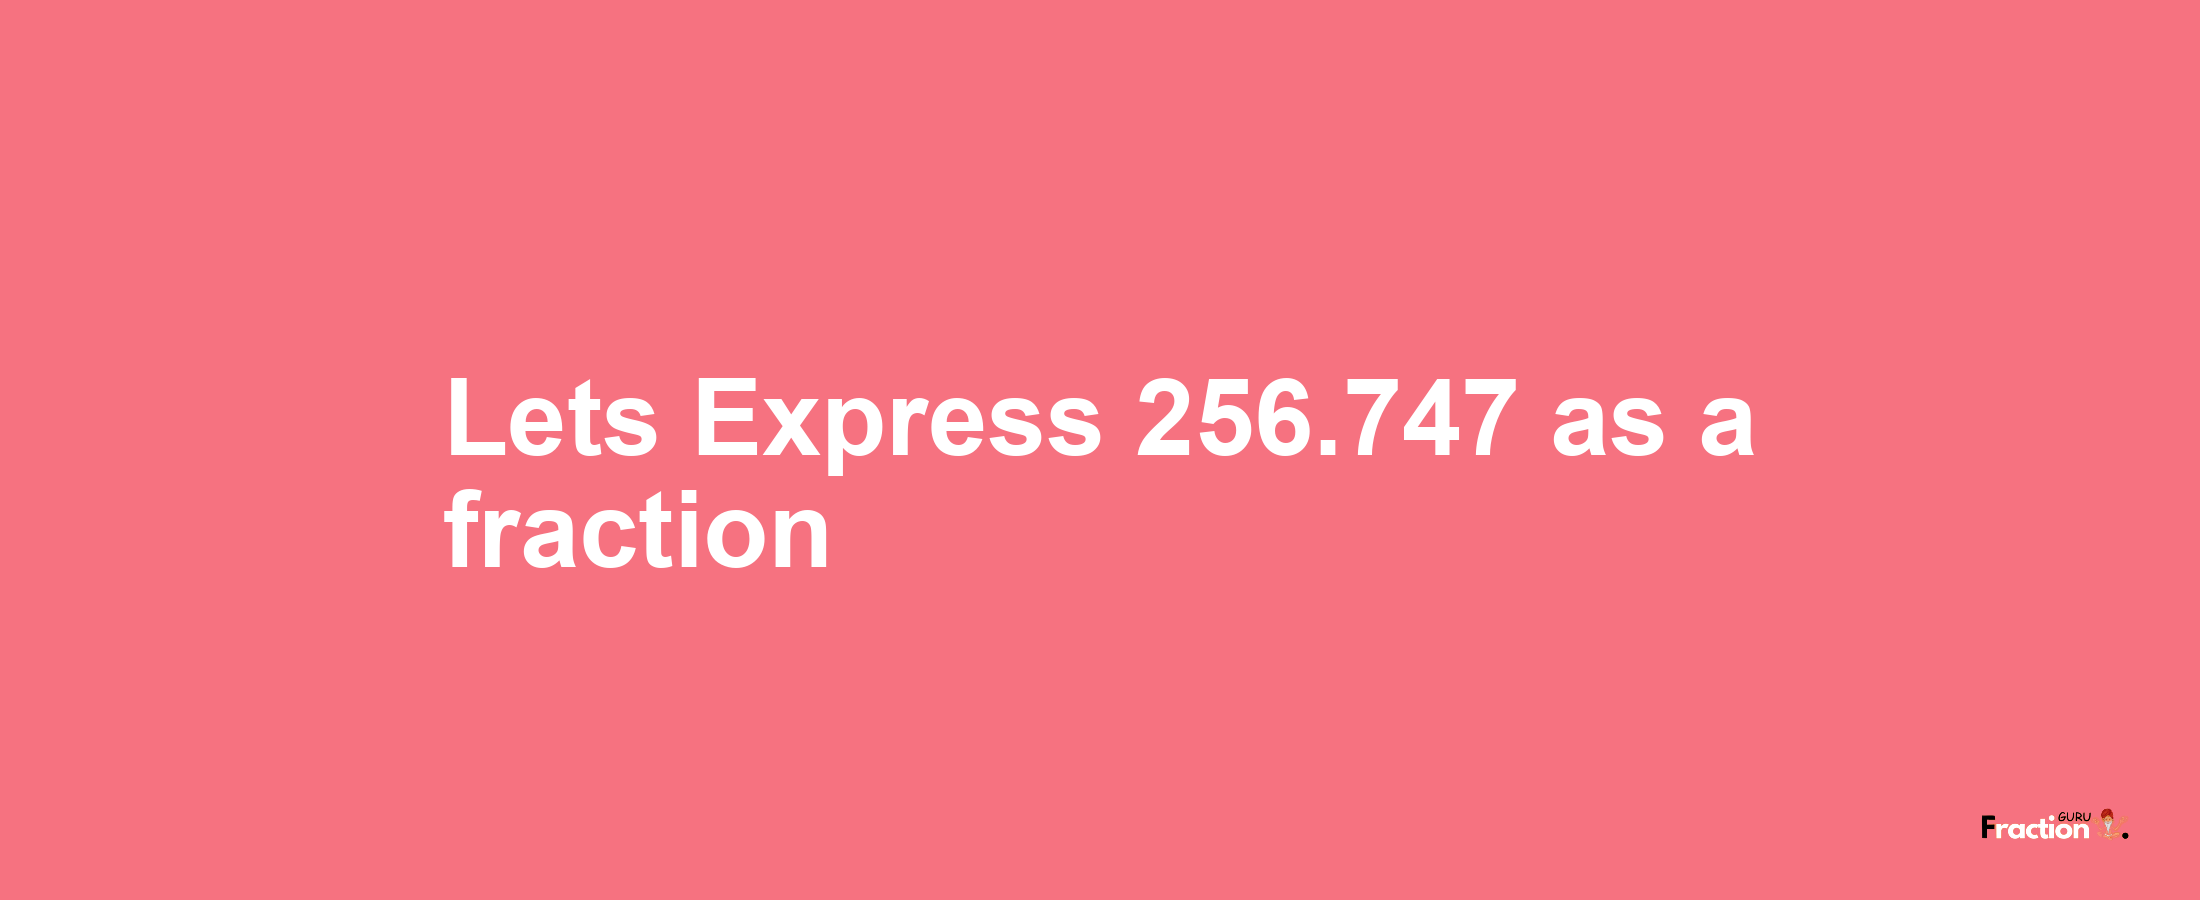 Lets Express 256.747 as afraction